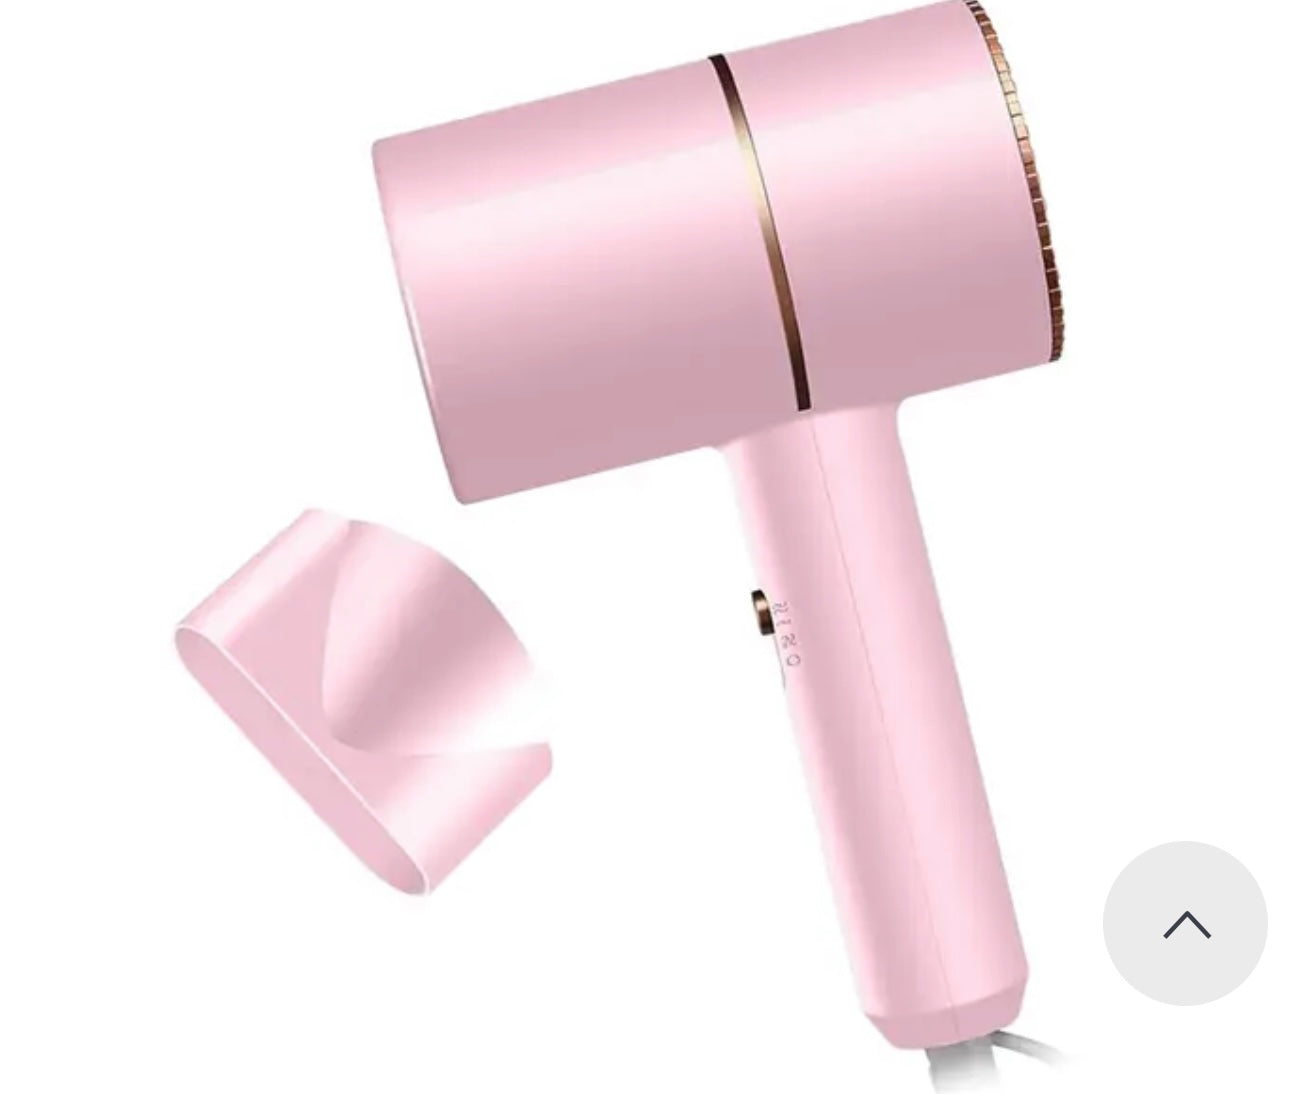 Hair Dryer Hot / Cold Air Hairdryer With Collecting Nozzle Blue Light Anion Blow Dryer For Home Travel Hotel Lightweight